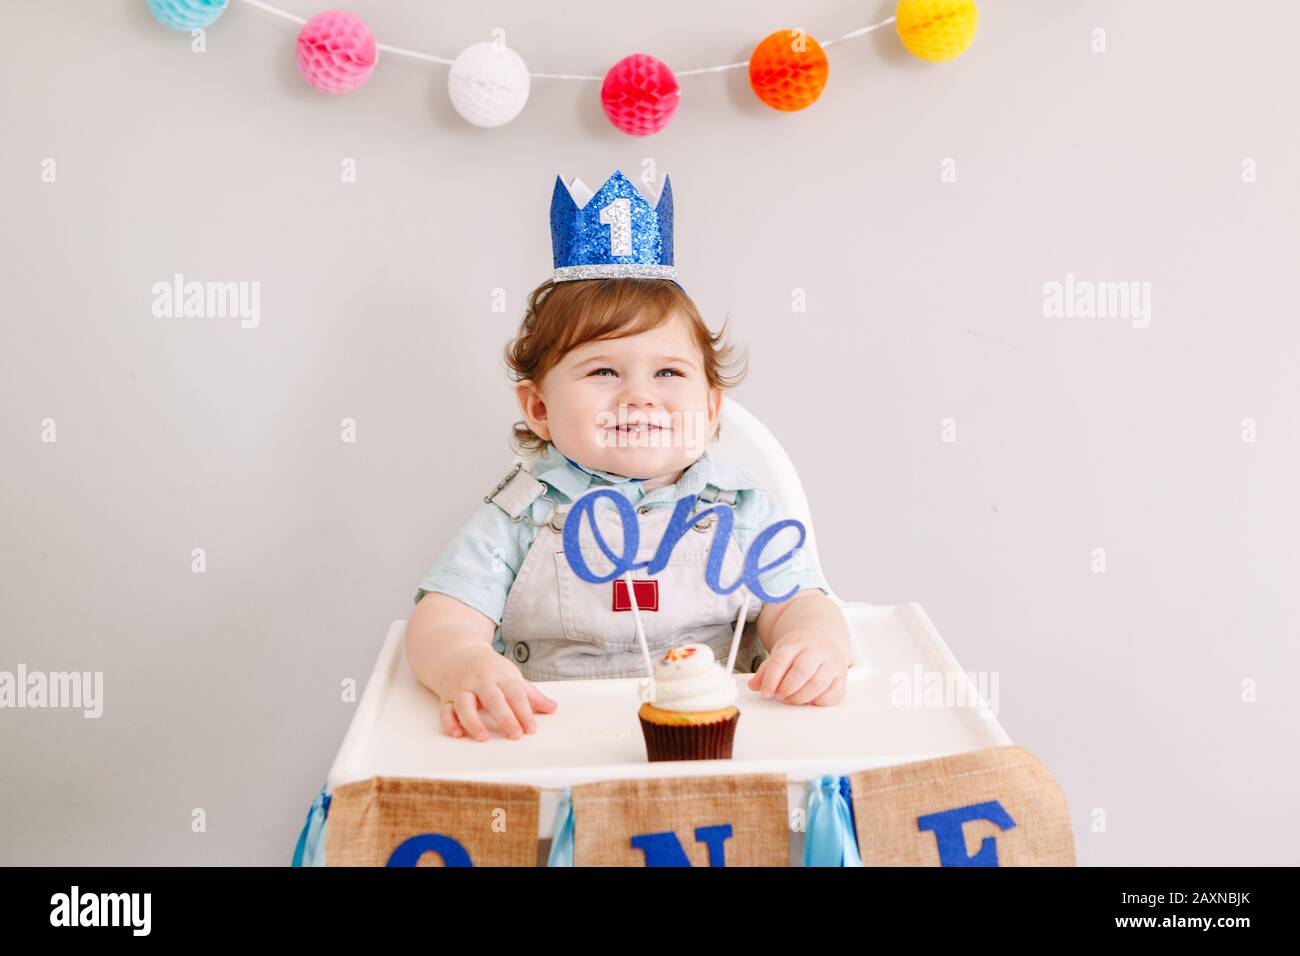 Cute adorable Caucasian baby boy in blue crown celebrating his first birthday at home. Child kid toddler sitting in high chair eating tasty cupcake de Stock Photo